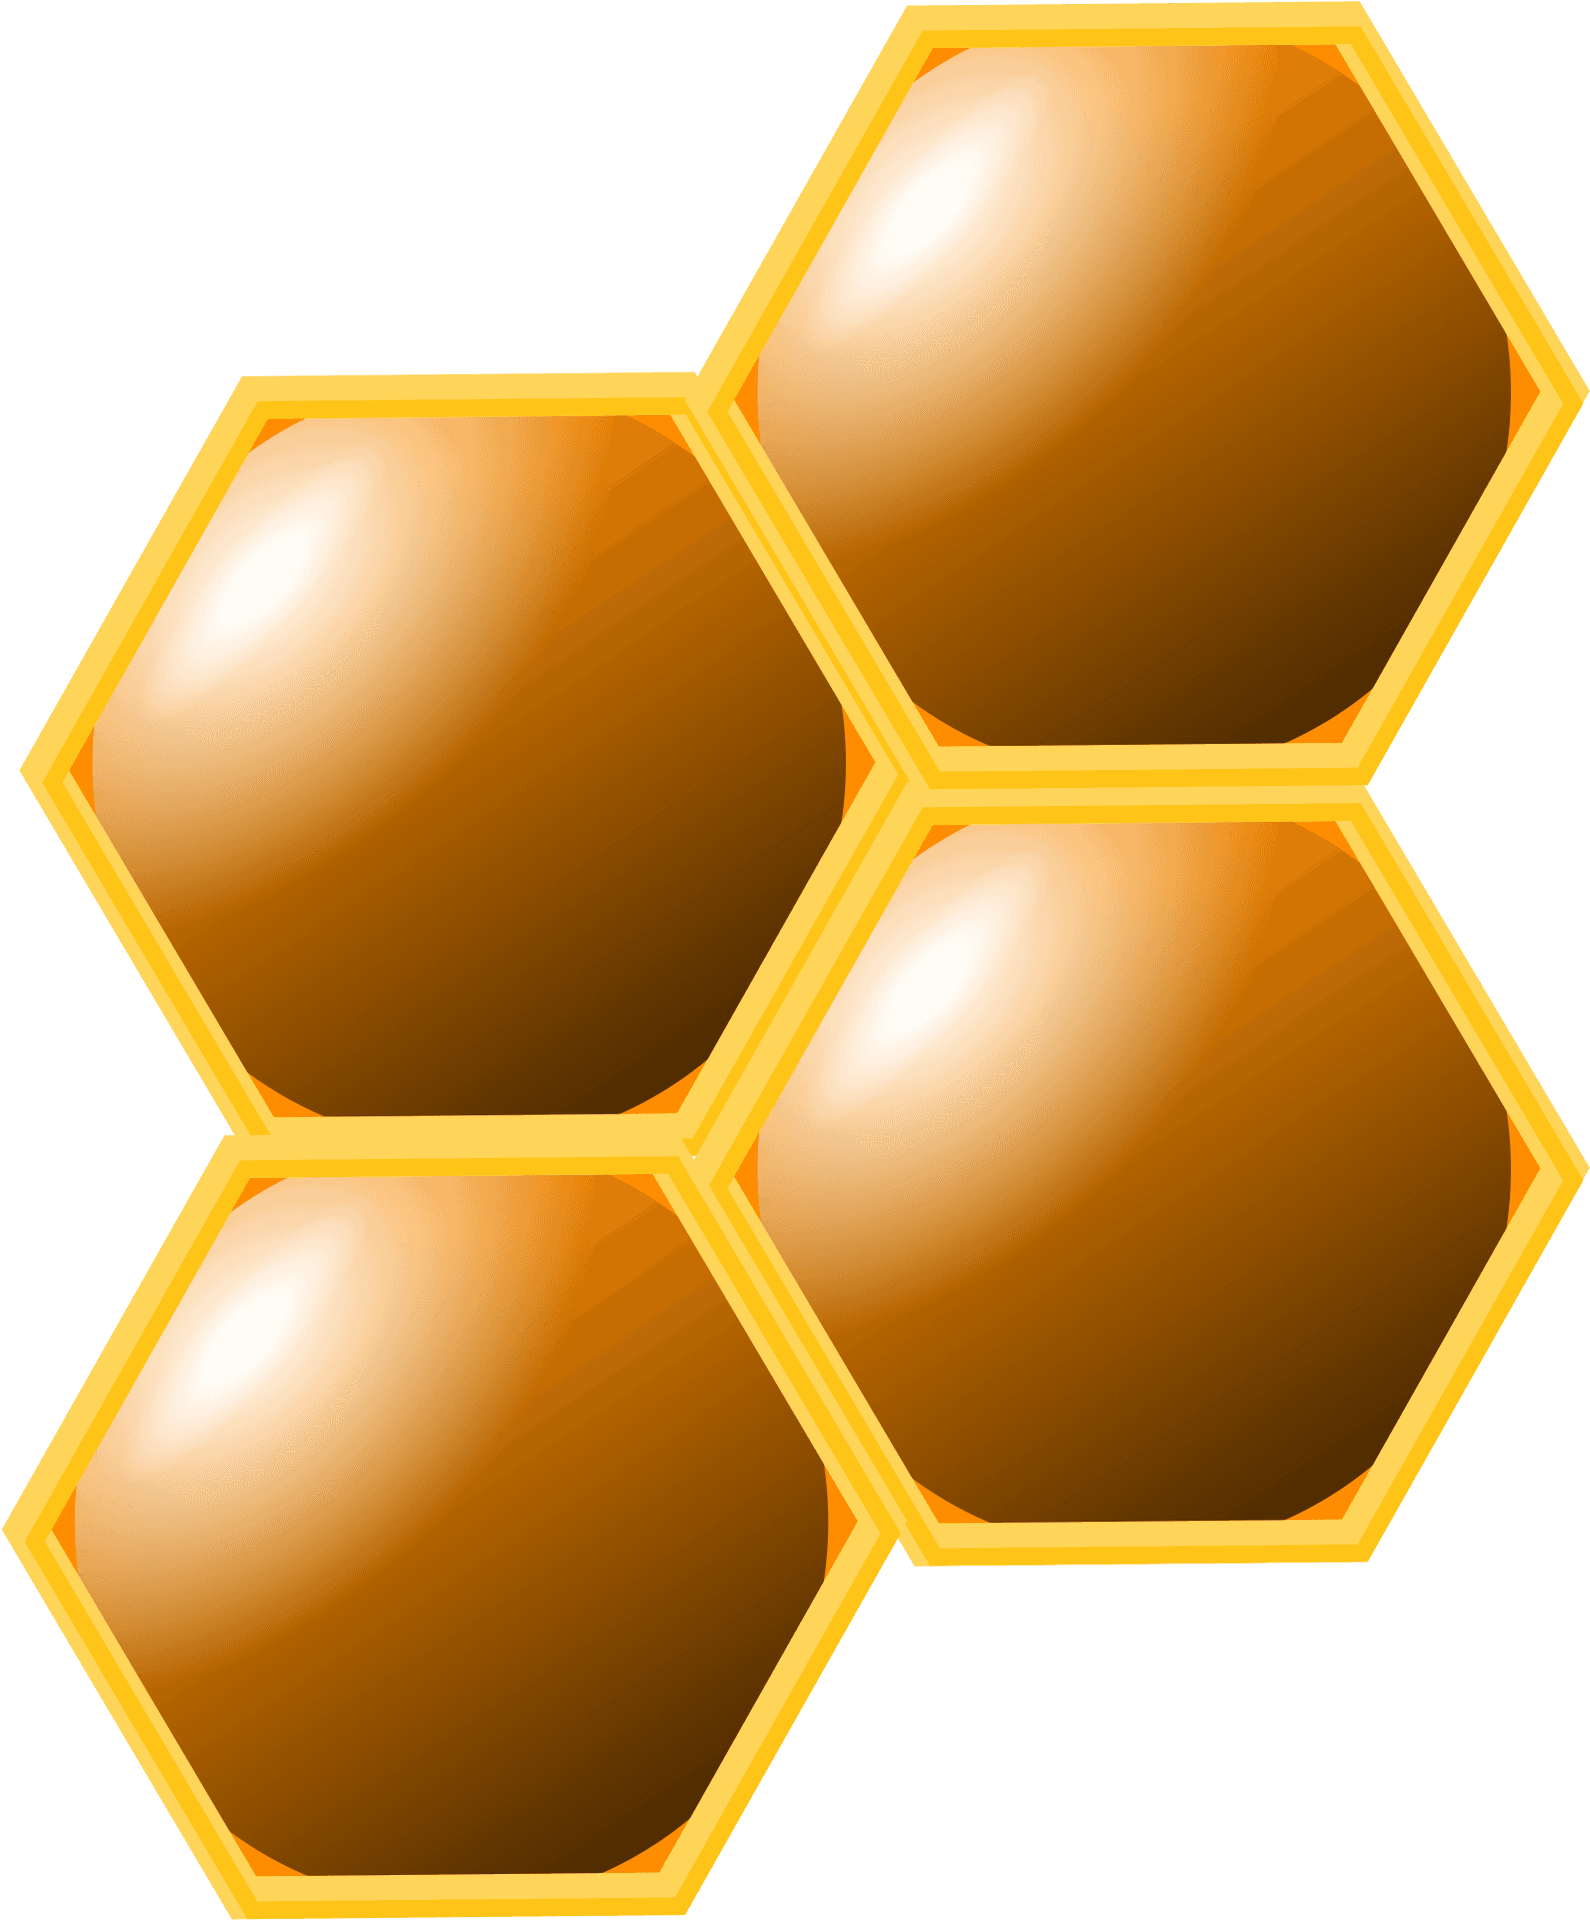 Golden Honeycomb Cells Graphic PNG